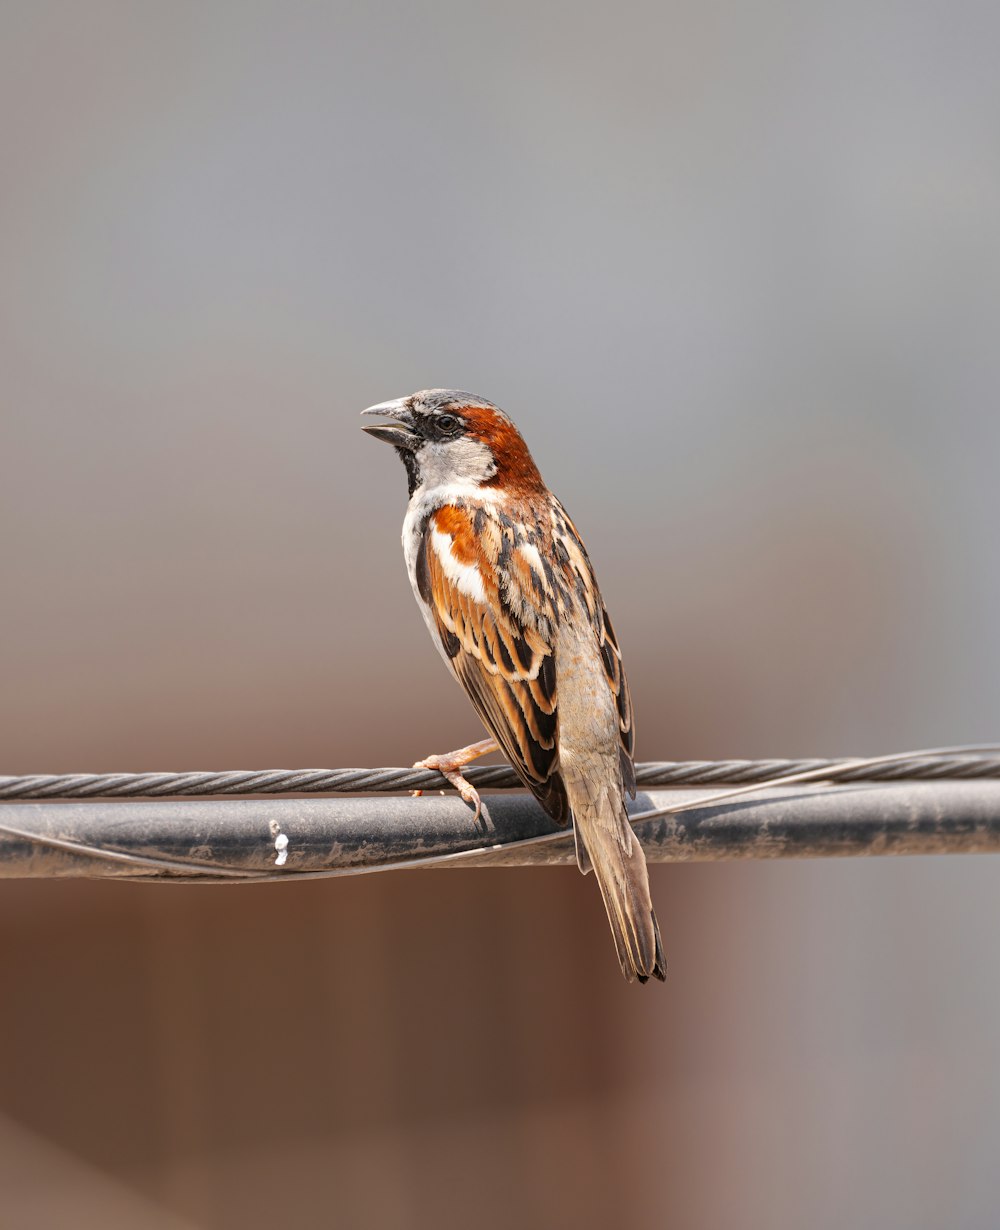 a bird sitting on a wire with a blurry background